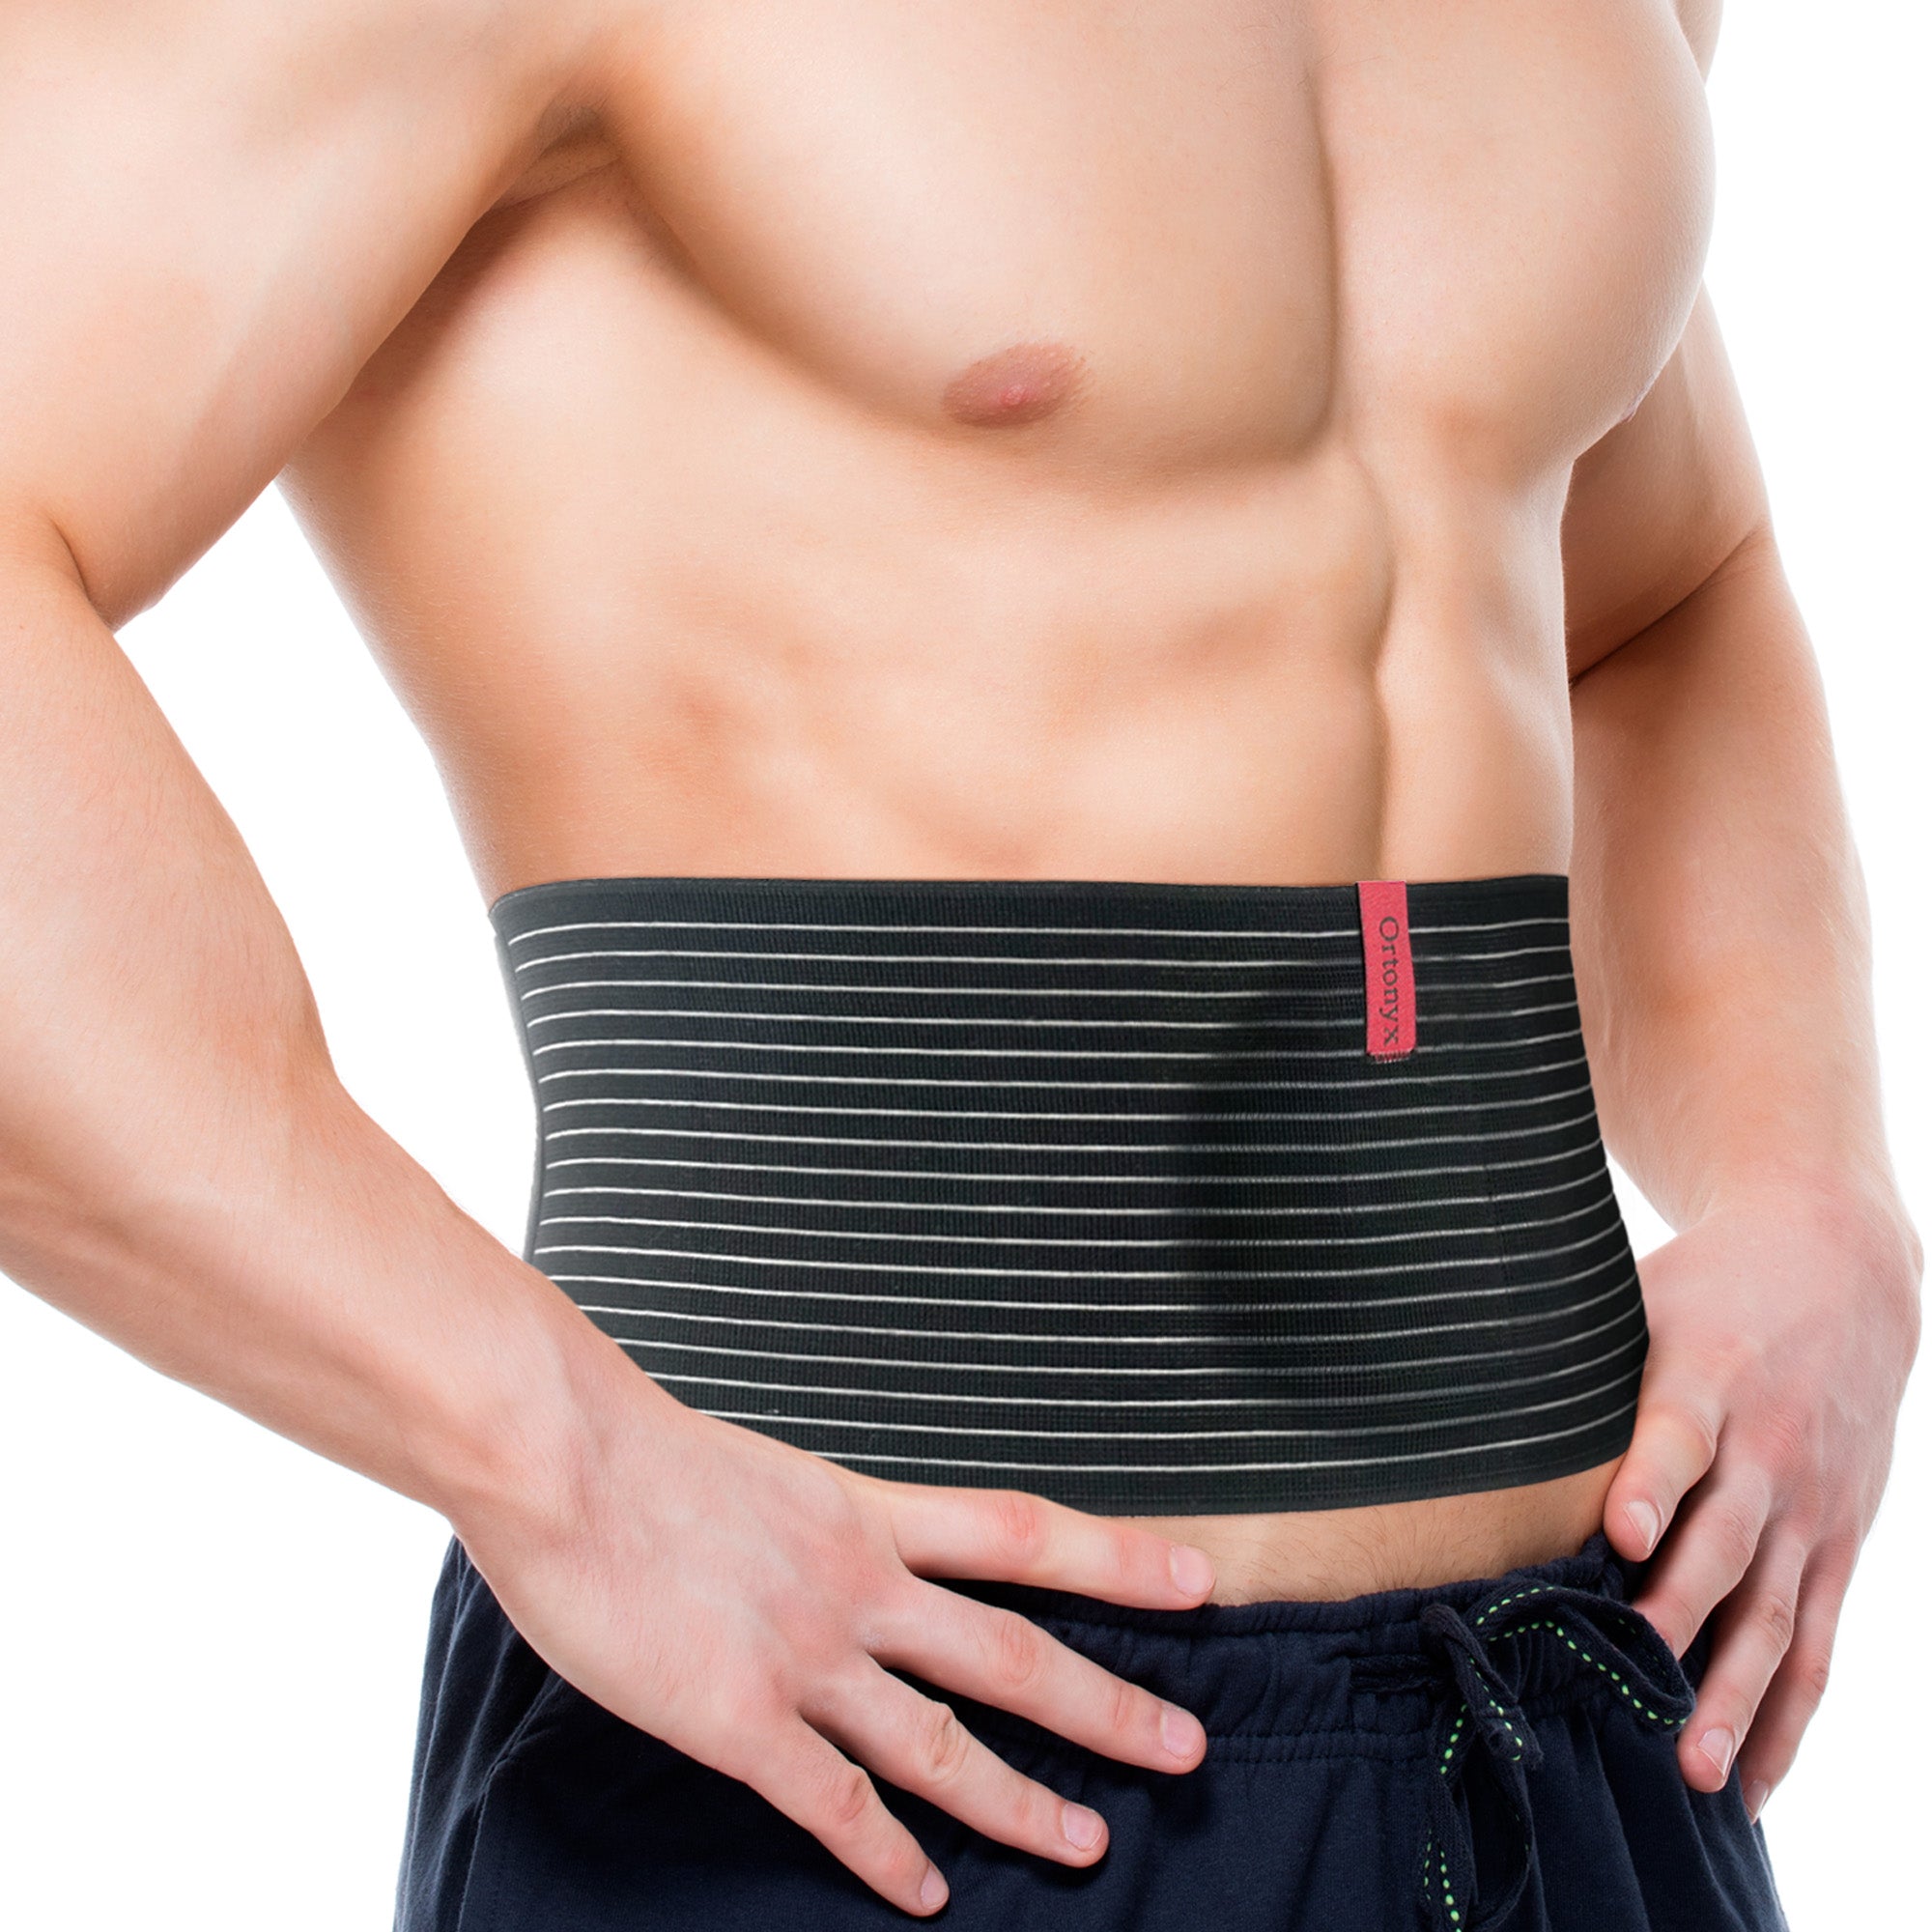 Relieves Pain And Discomfort For Umbilic, Umbilical Abdominal And Scar Umbilical  Hernia Support Belt